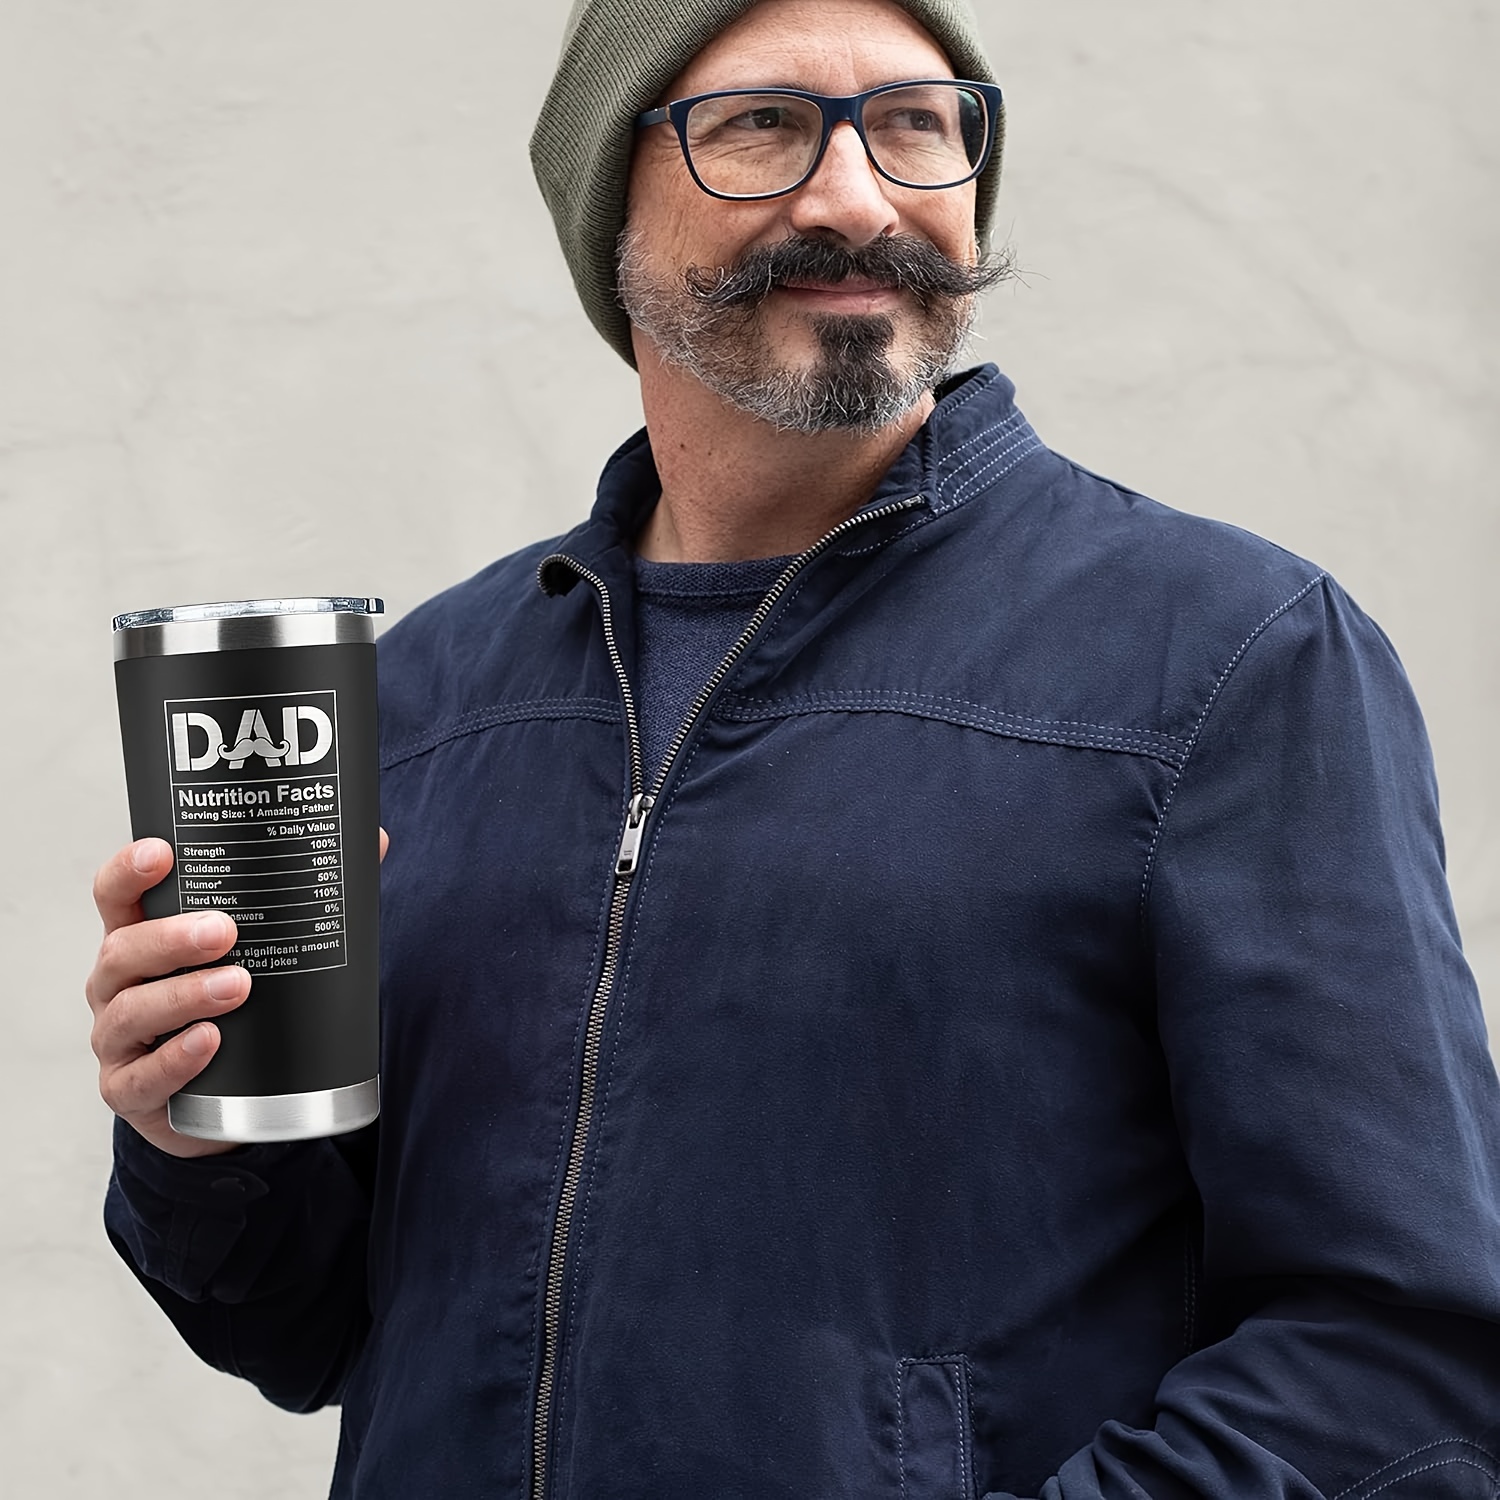 gifts for dad from daughter son dad gifts dad christmas gifts from daughter presents for dad birthday gifts for dad 20 oz tumbler for cafe details 4